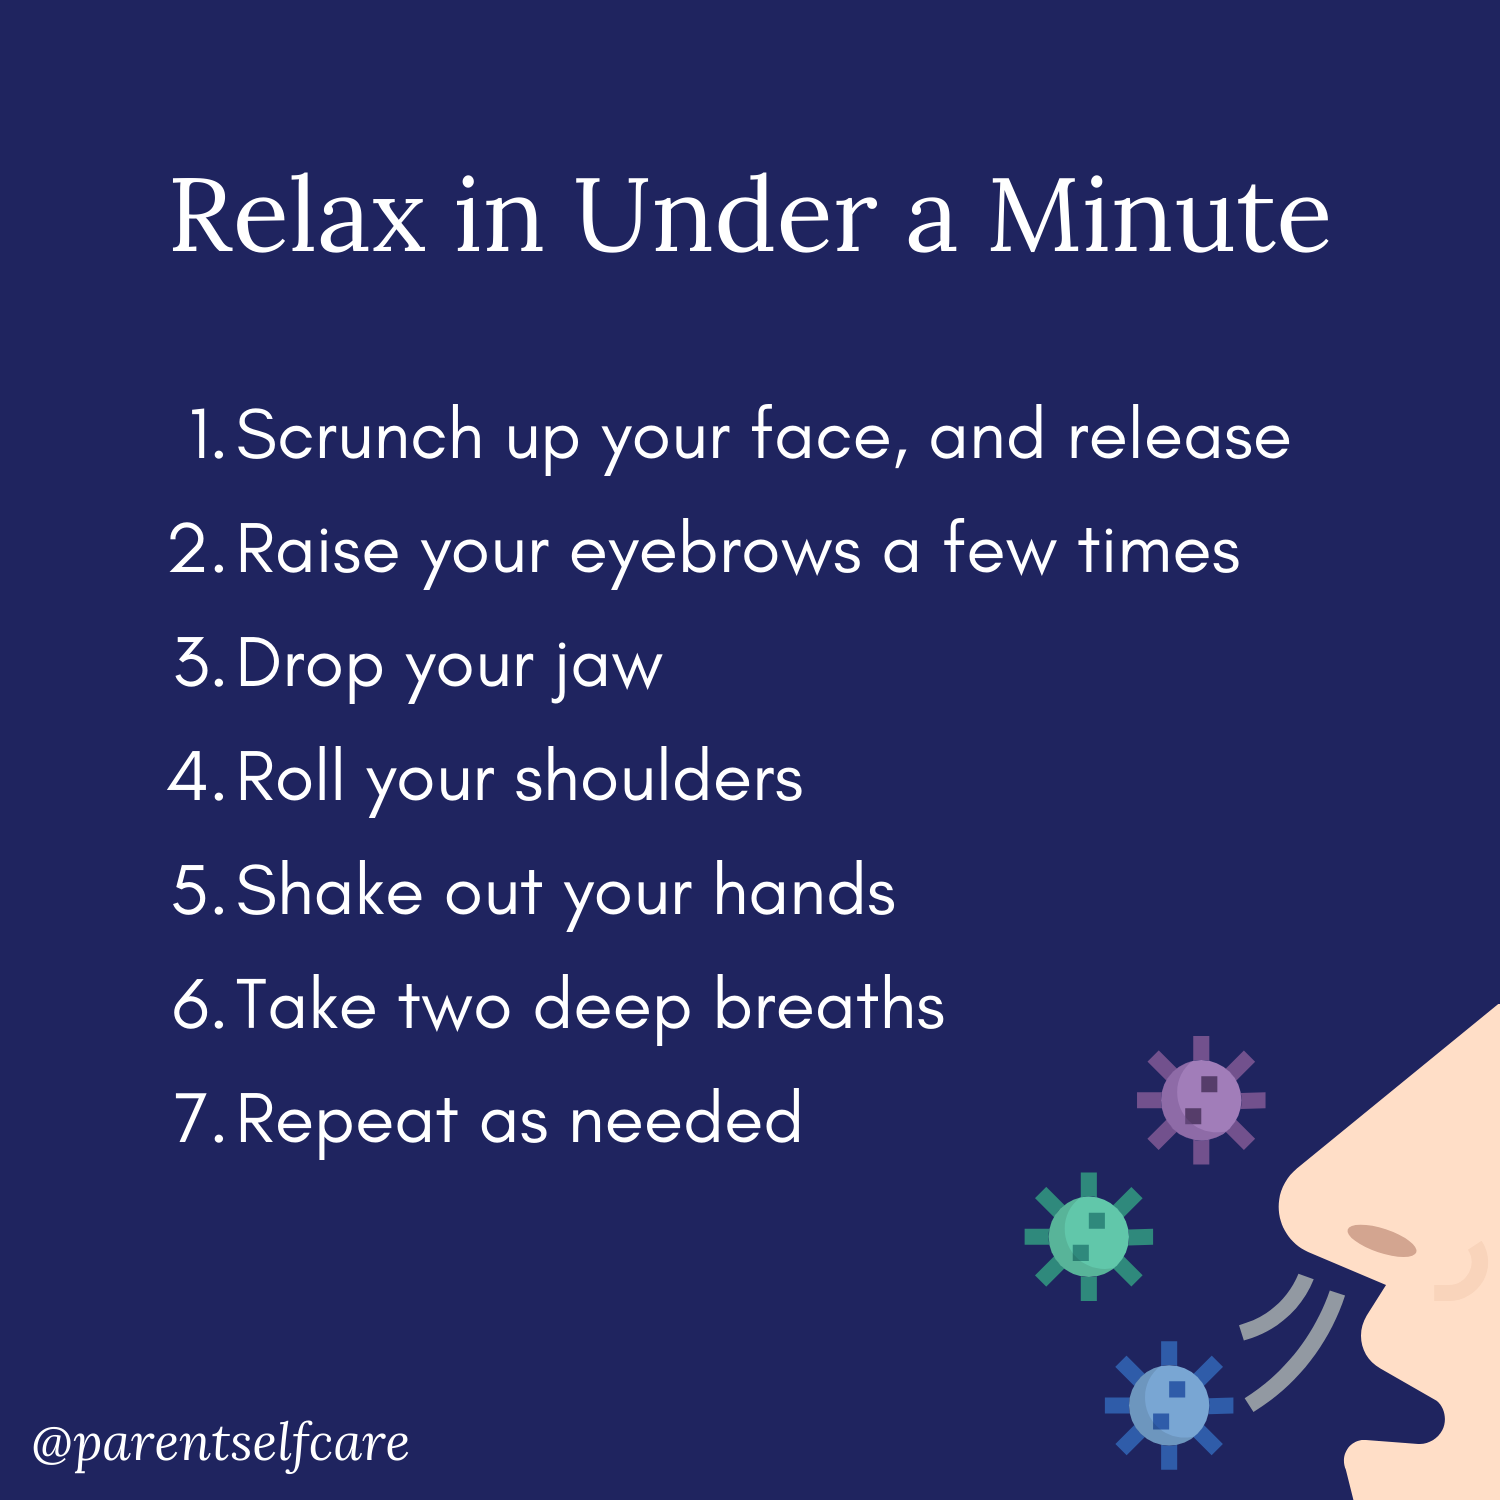 Relaxation exercises